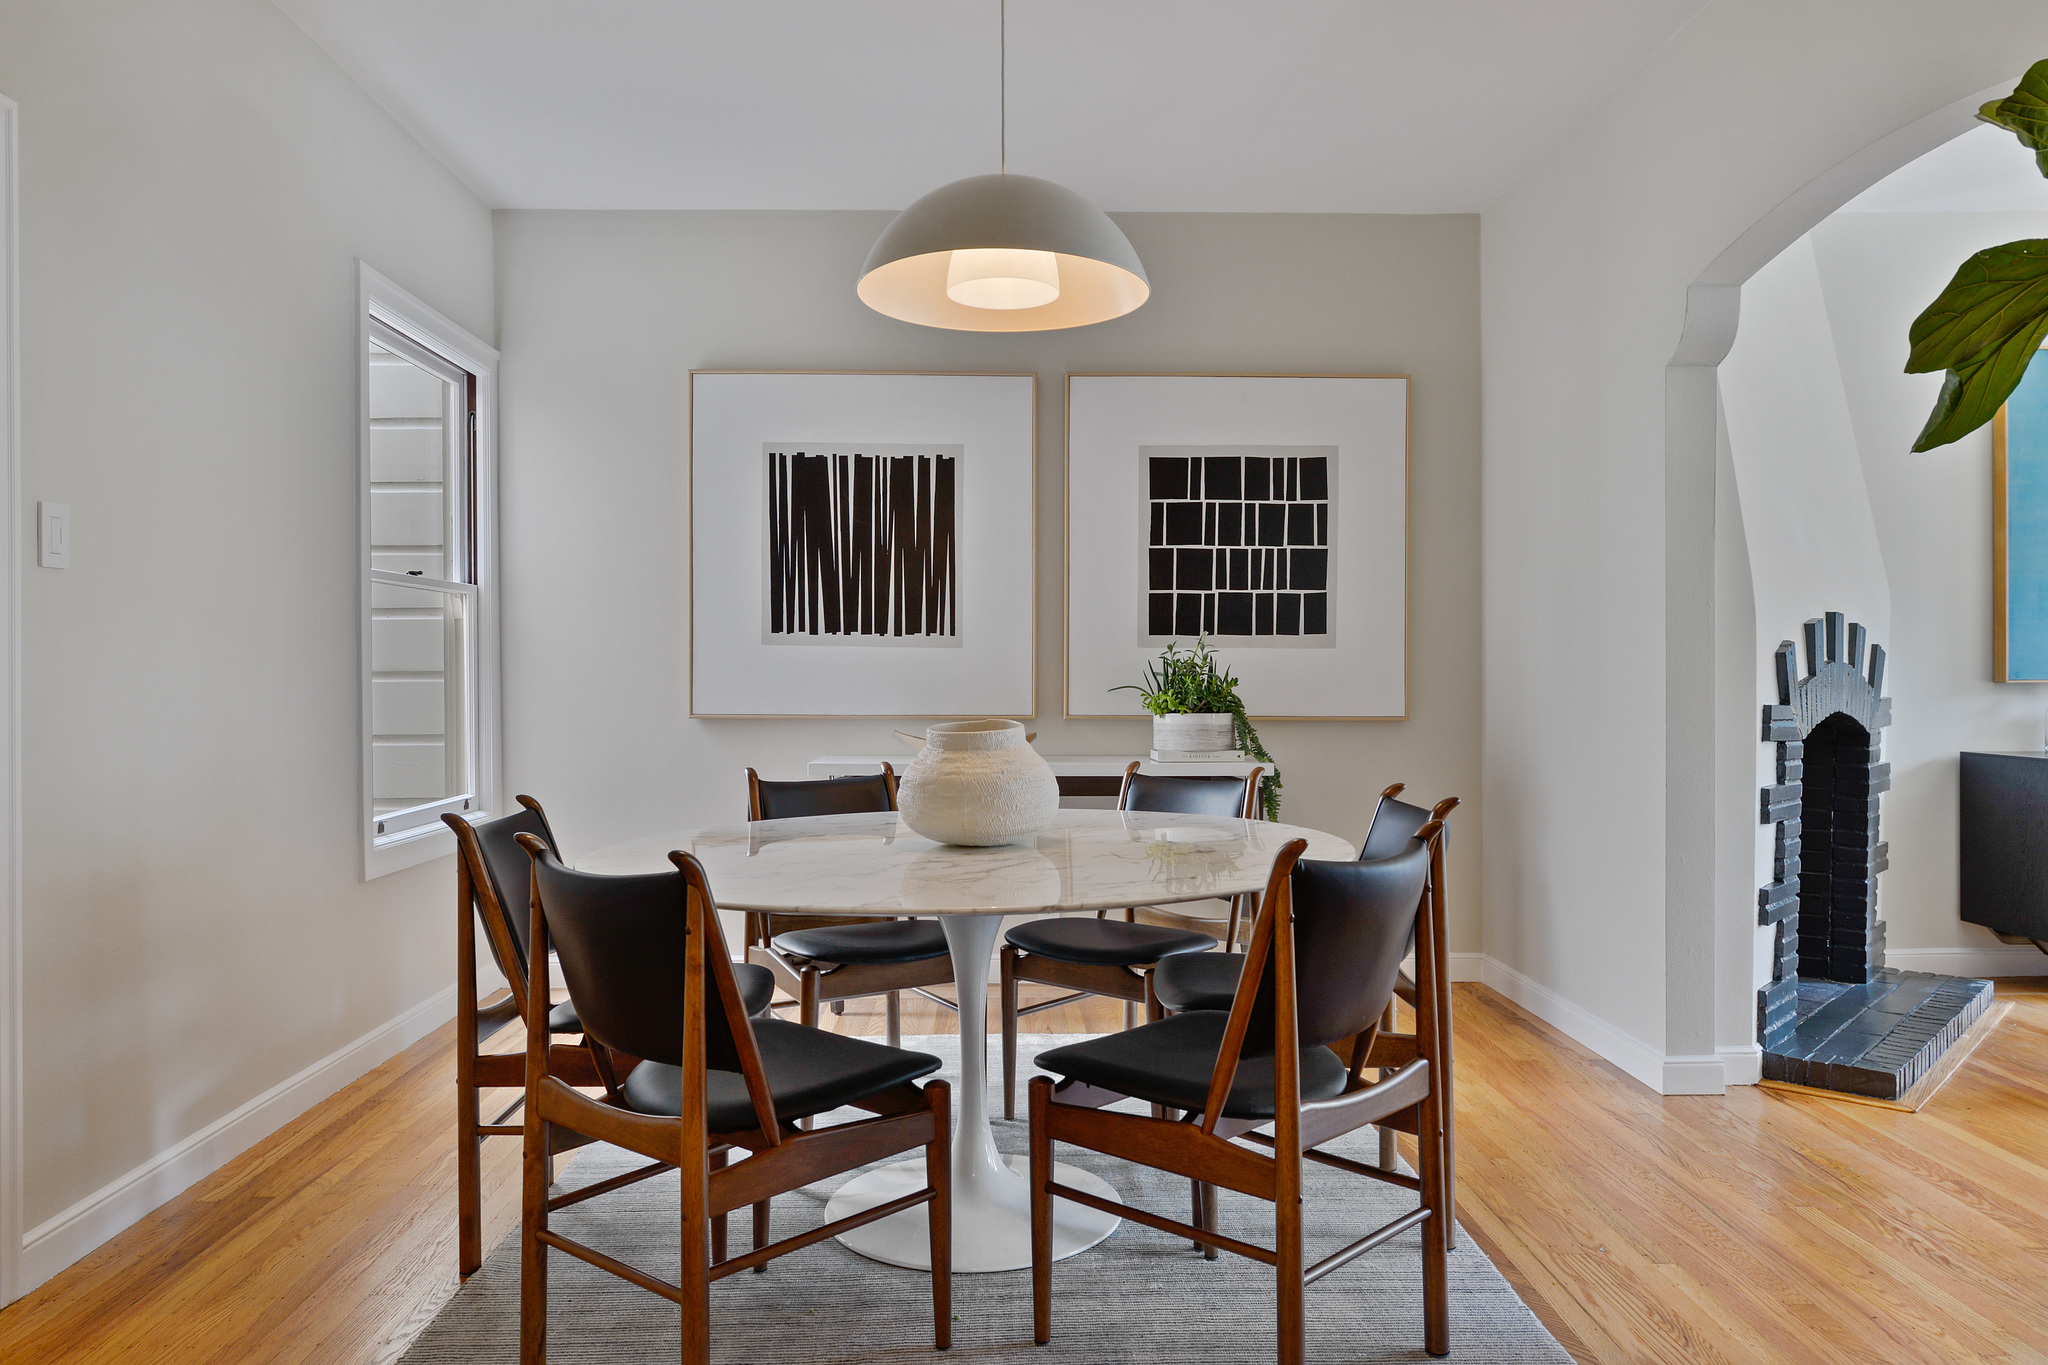 Property Photo: Dining area with wood floors